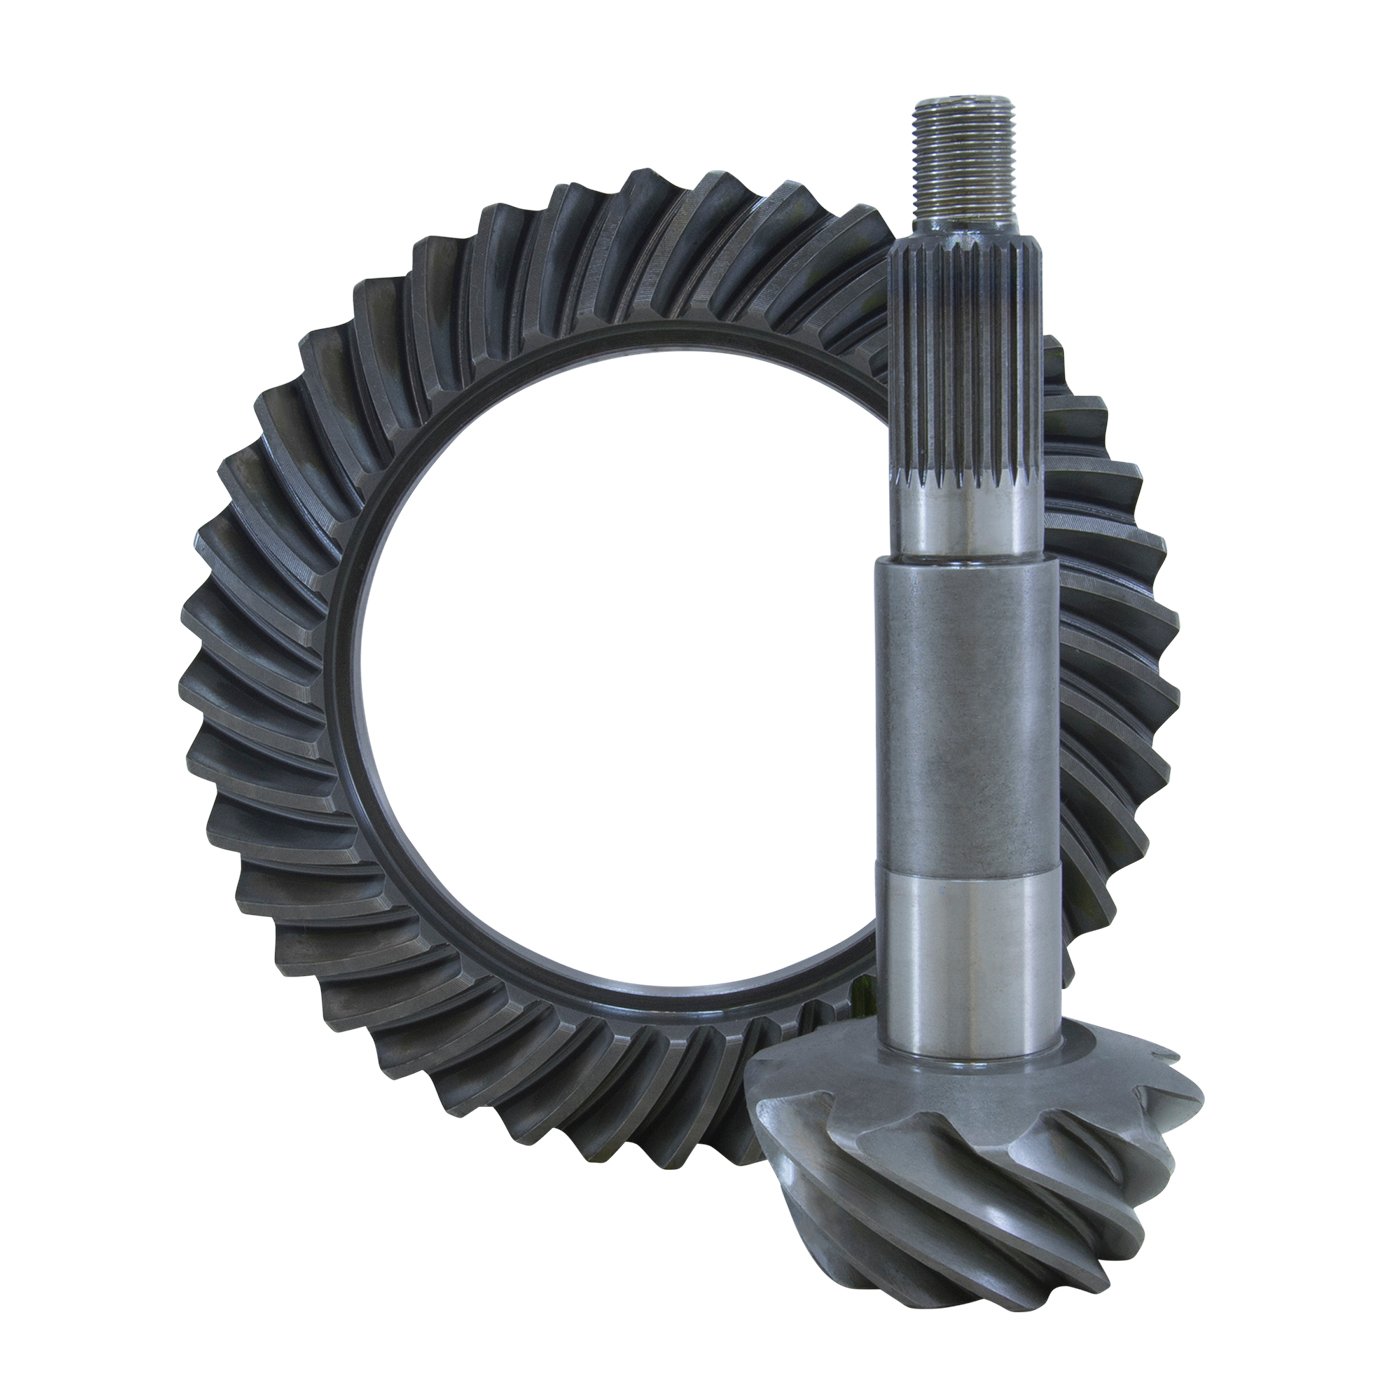 USA Standard ZG D44-373 Ring & Pinion Replacement Gear Set, For Dana 44, 3.73 Ratio